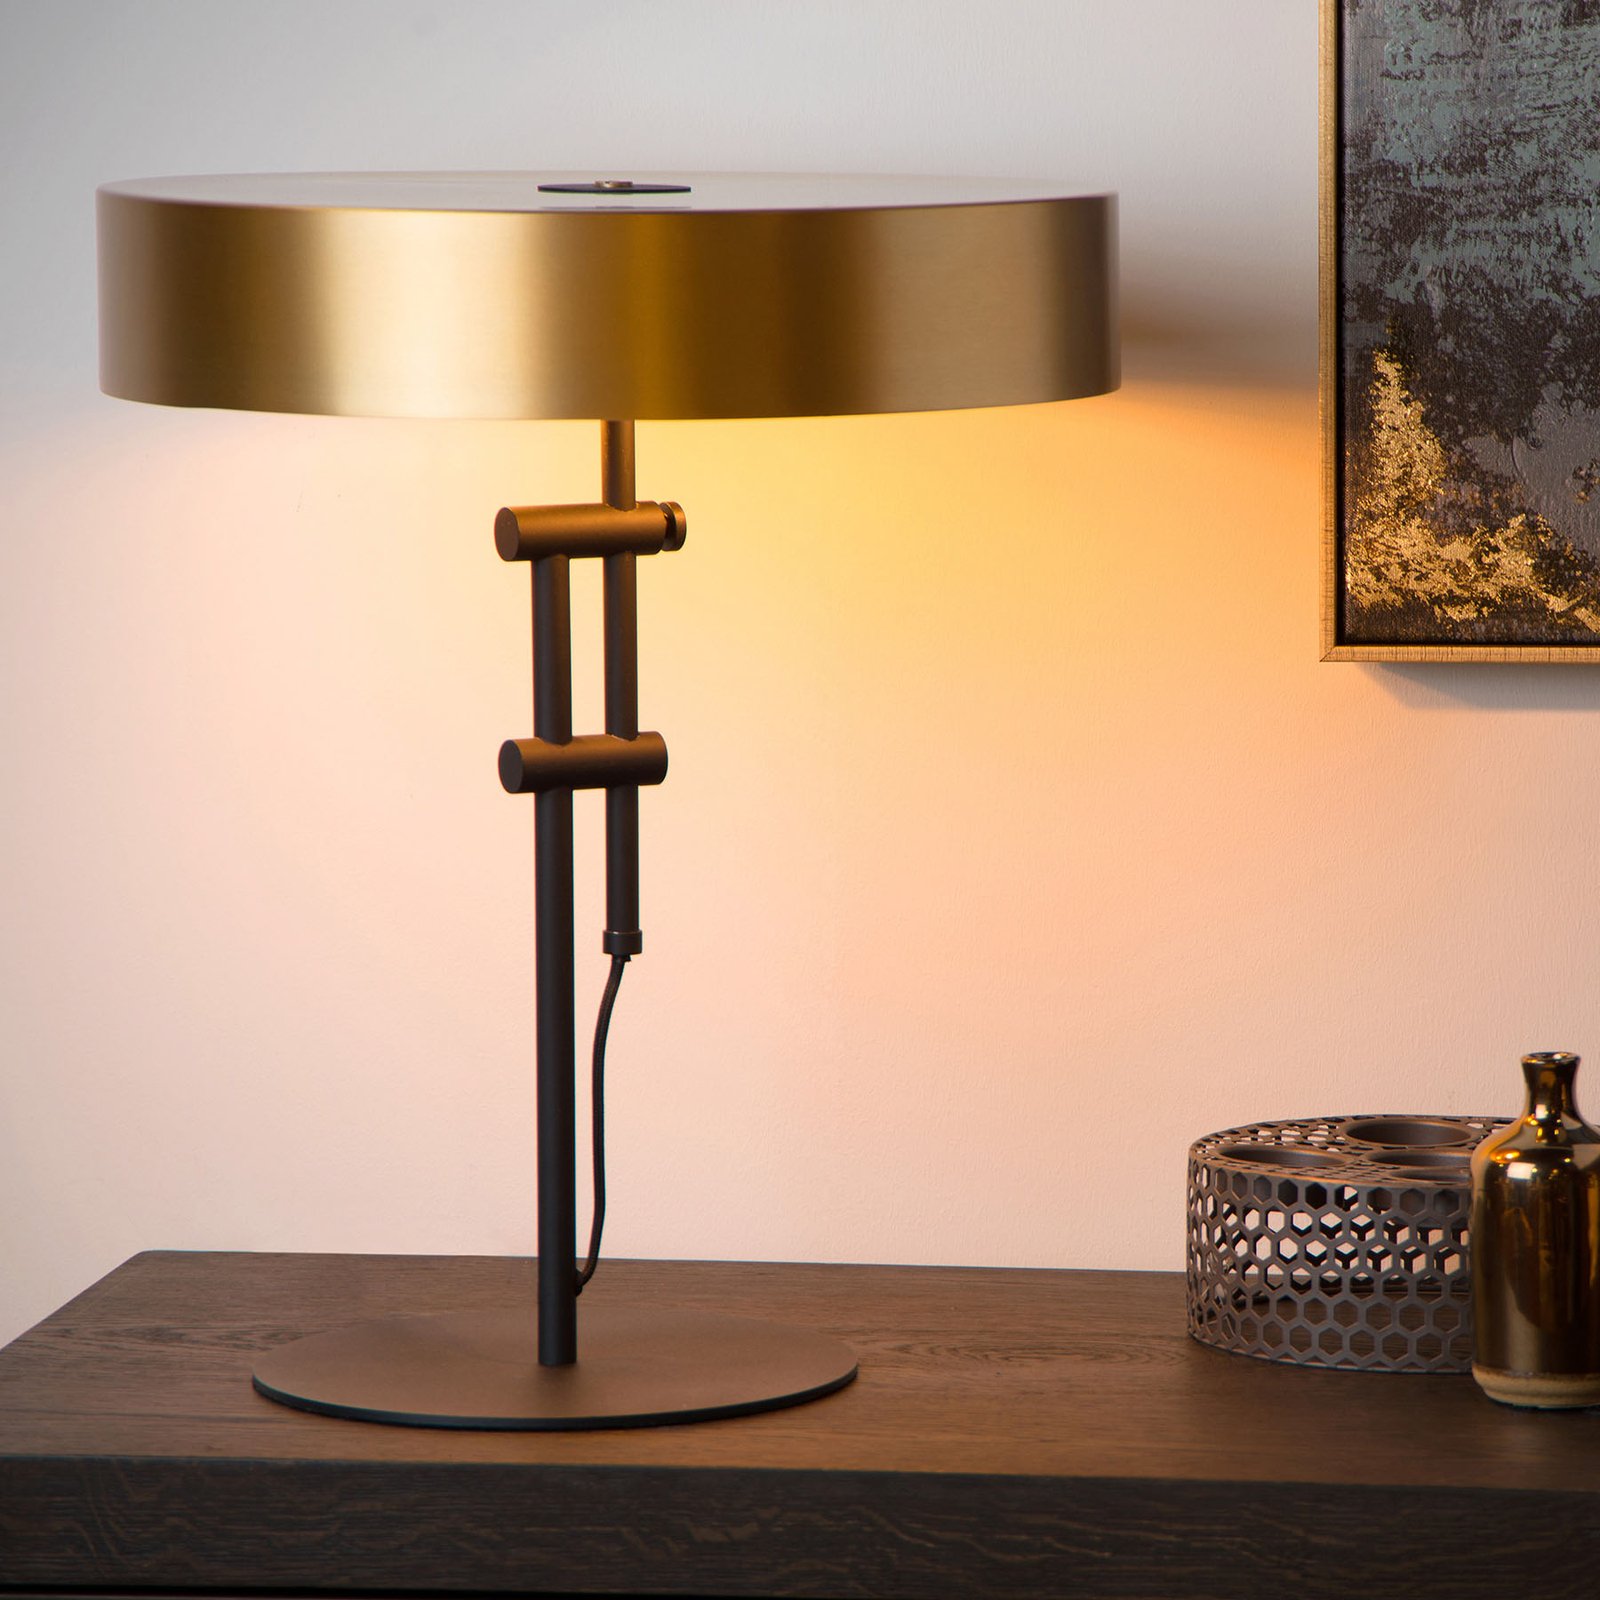 Giada table lamp with flat lampshade in gold